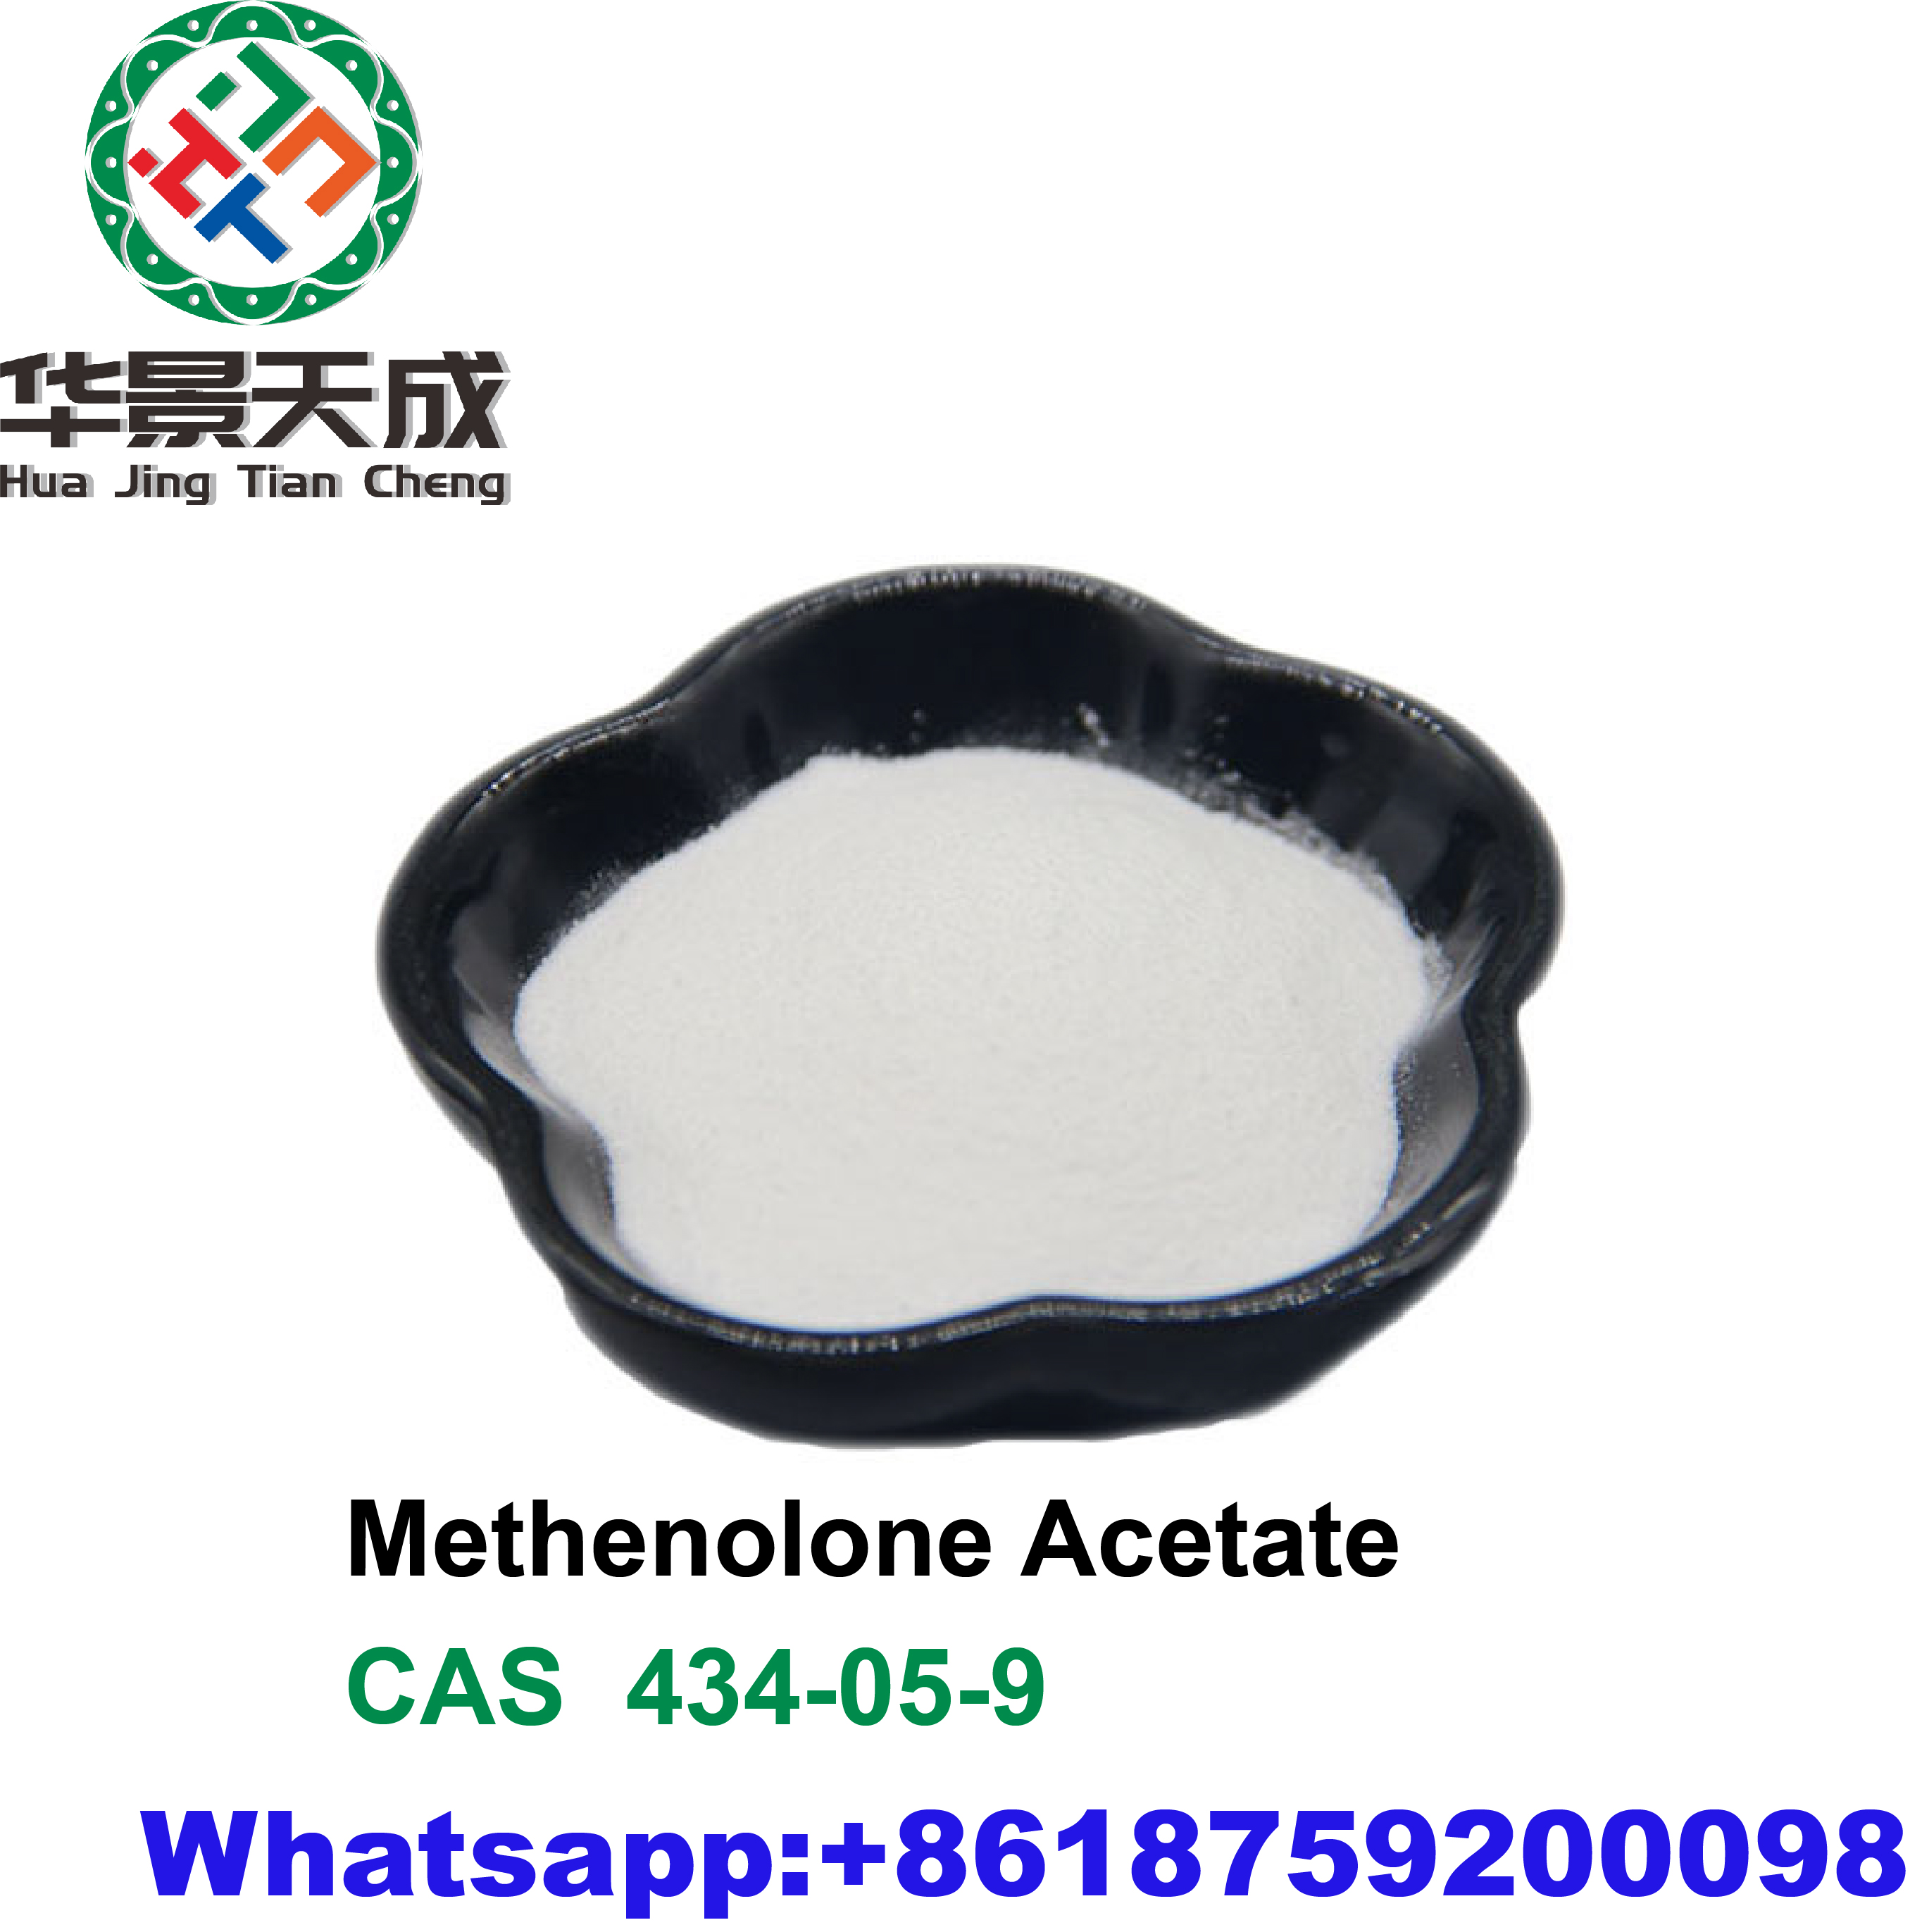 Methenolone Acetate Builder Lean Muscle Anabolic Raw Steroid Hormone Primobolan A Powder CAS 434-05-9 Featured Image